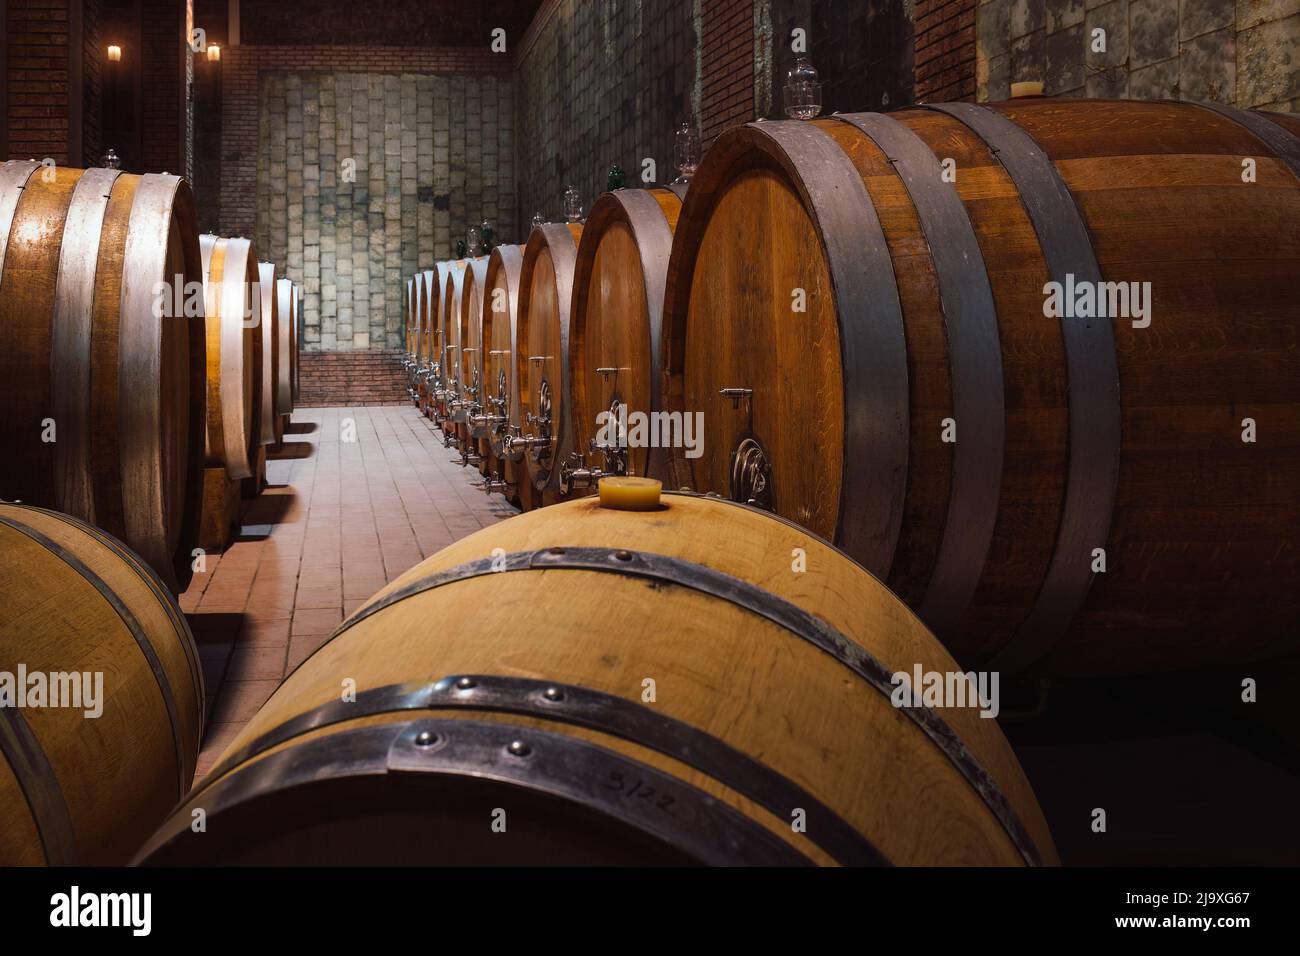 Underground dark cool arched wine cellar, storage room with large wooden barrels, placed in a line, deep focus. Stock Photo